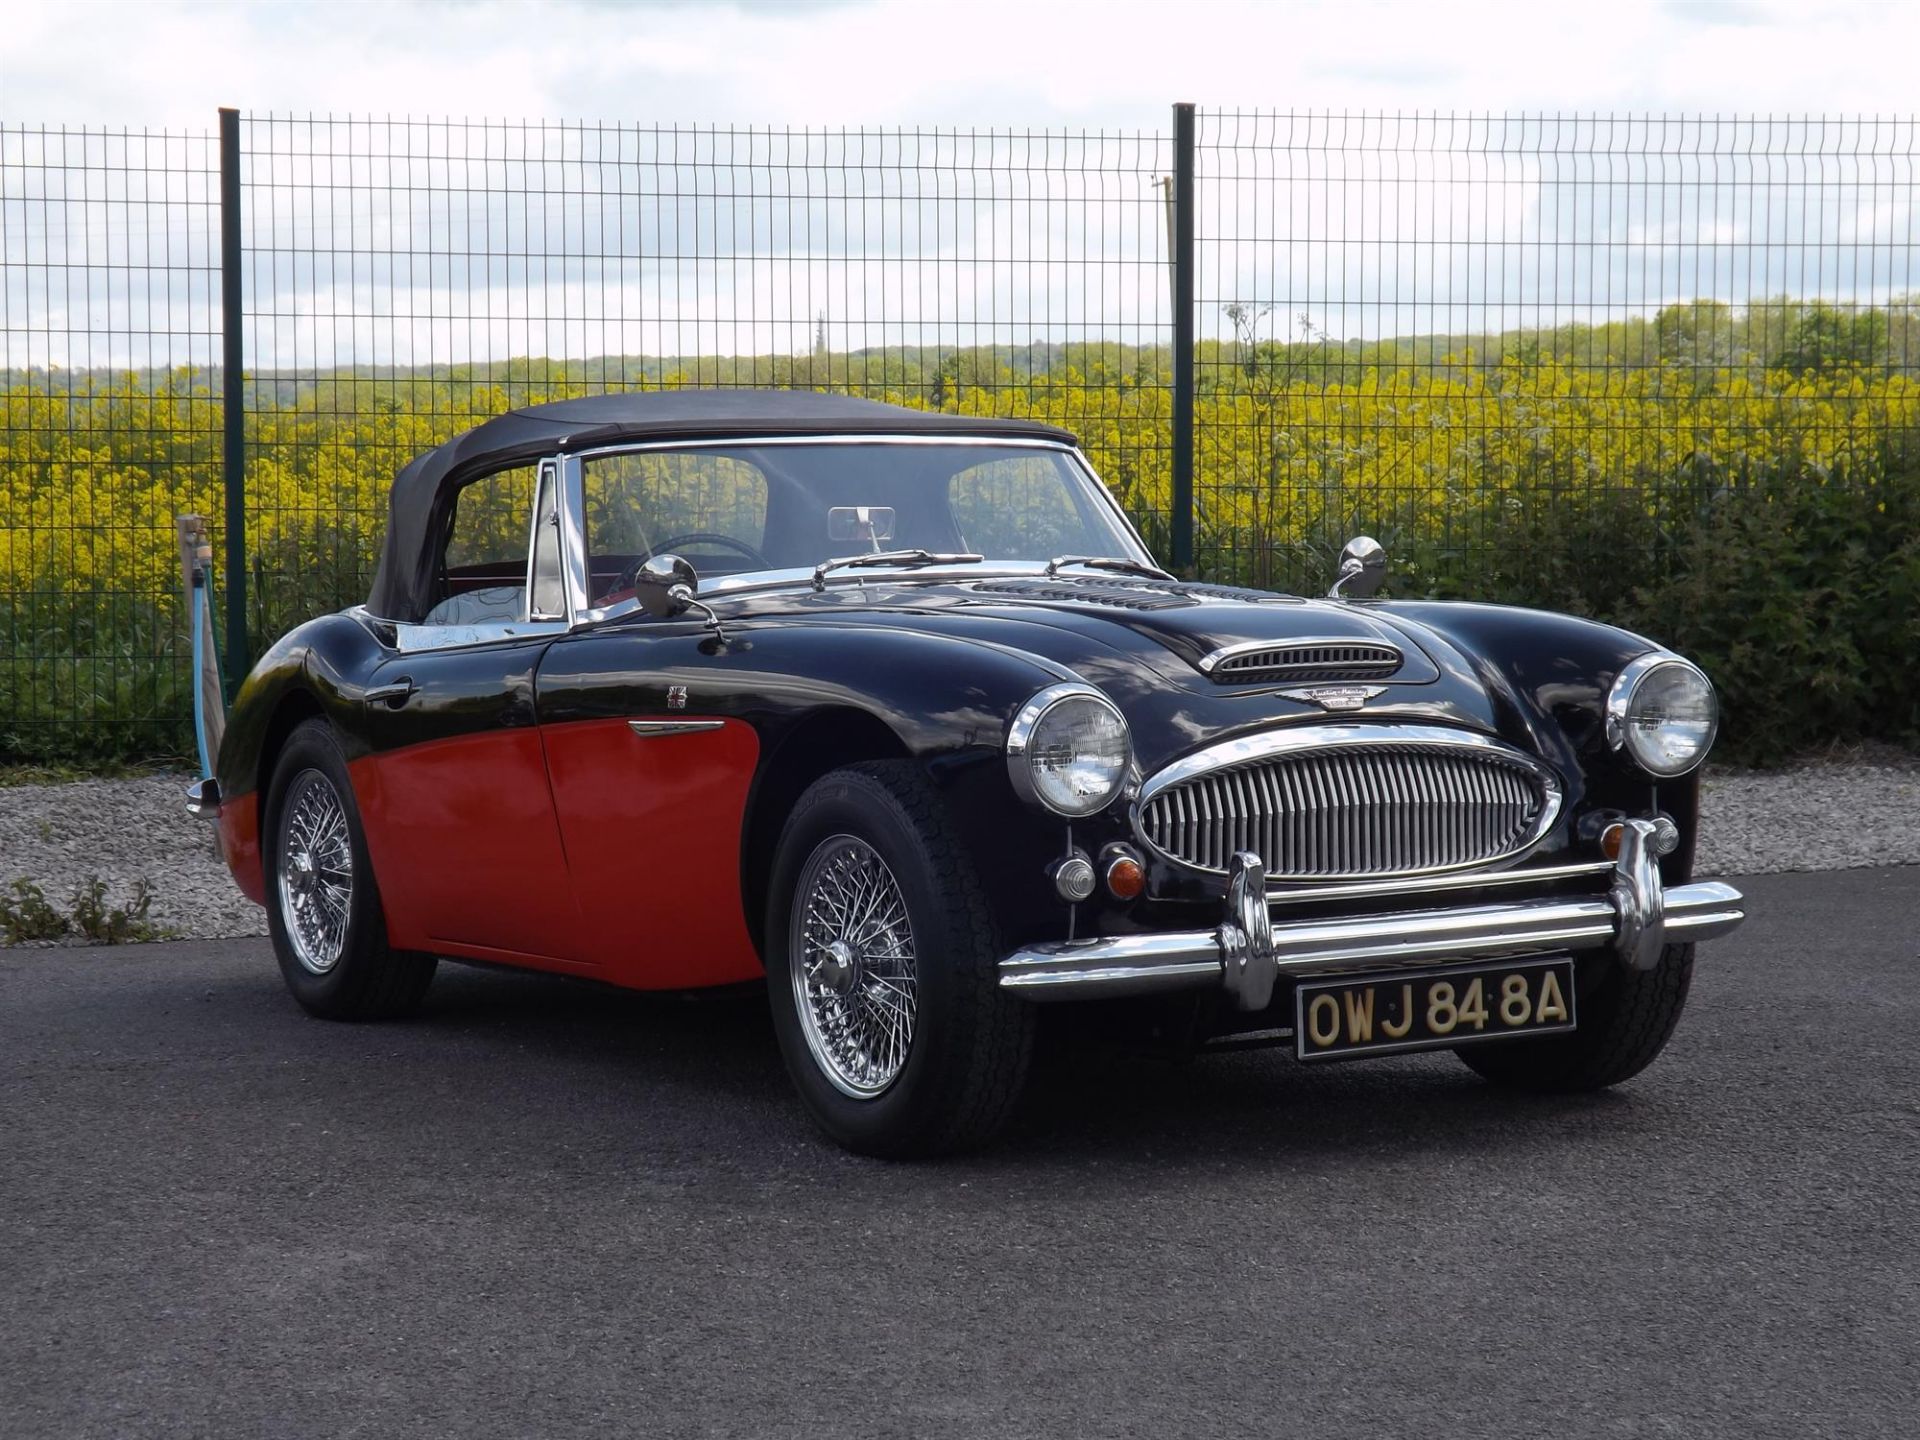 1963 Austin Healey 3000 MKII A (BJ7) - Image 2 of 5